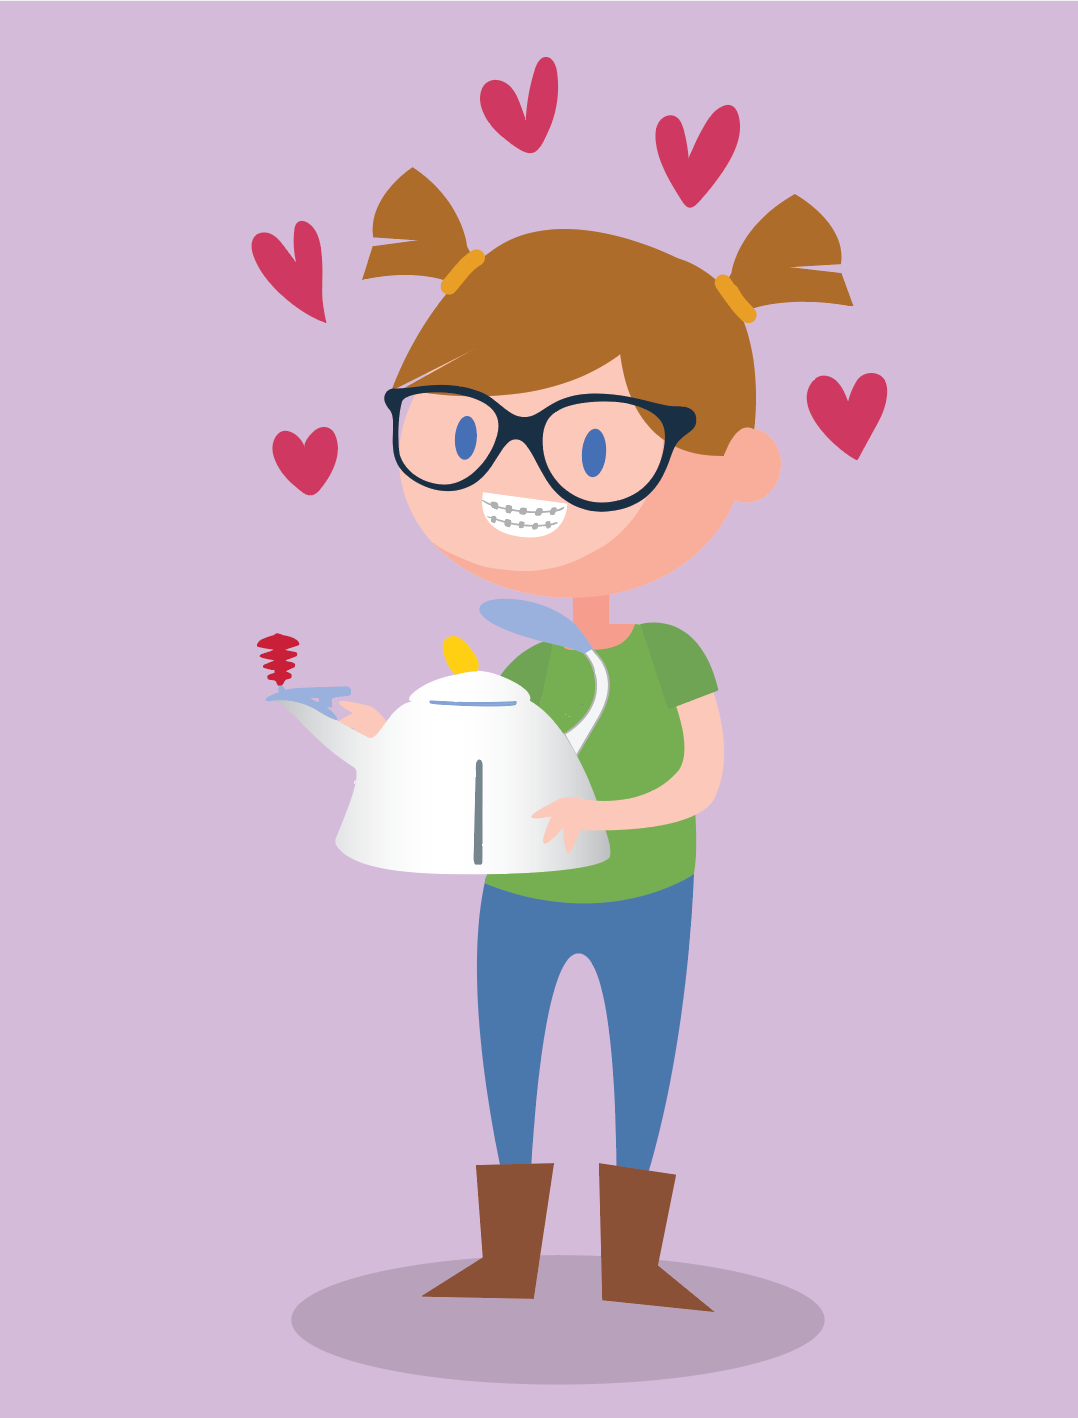 cartoon drawing of a smiling child with pigtails, glasses, and braces on her teeth. she's smiling widely while holding a beautiful teapot with hearts popping up around her head.